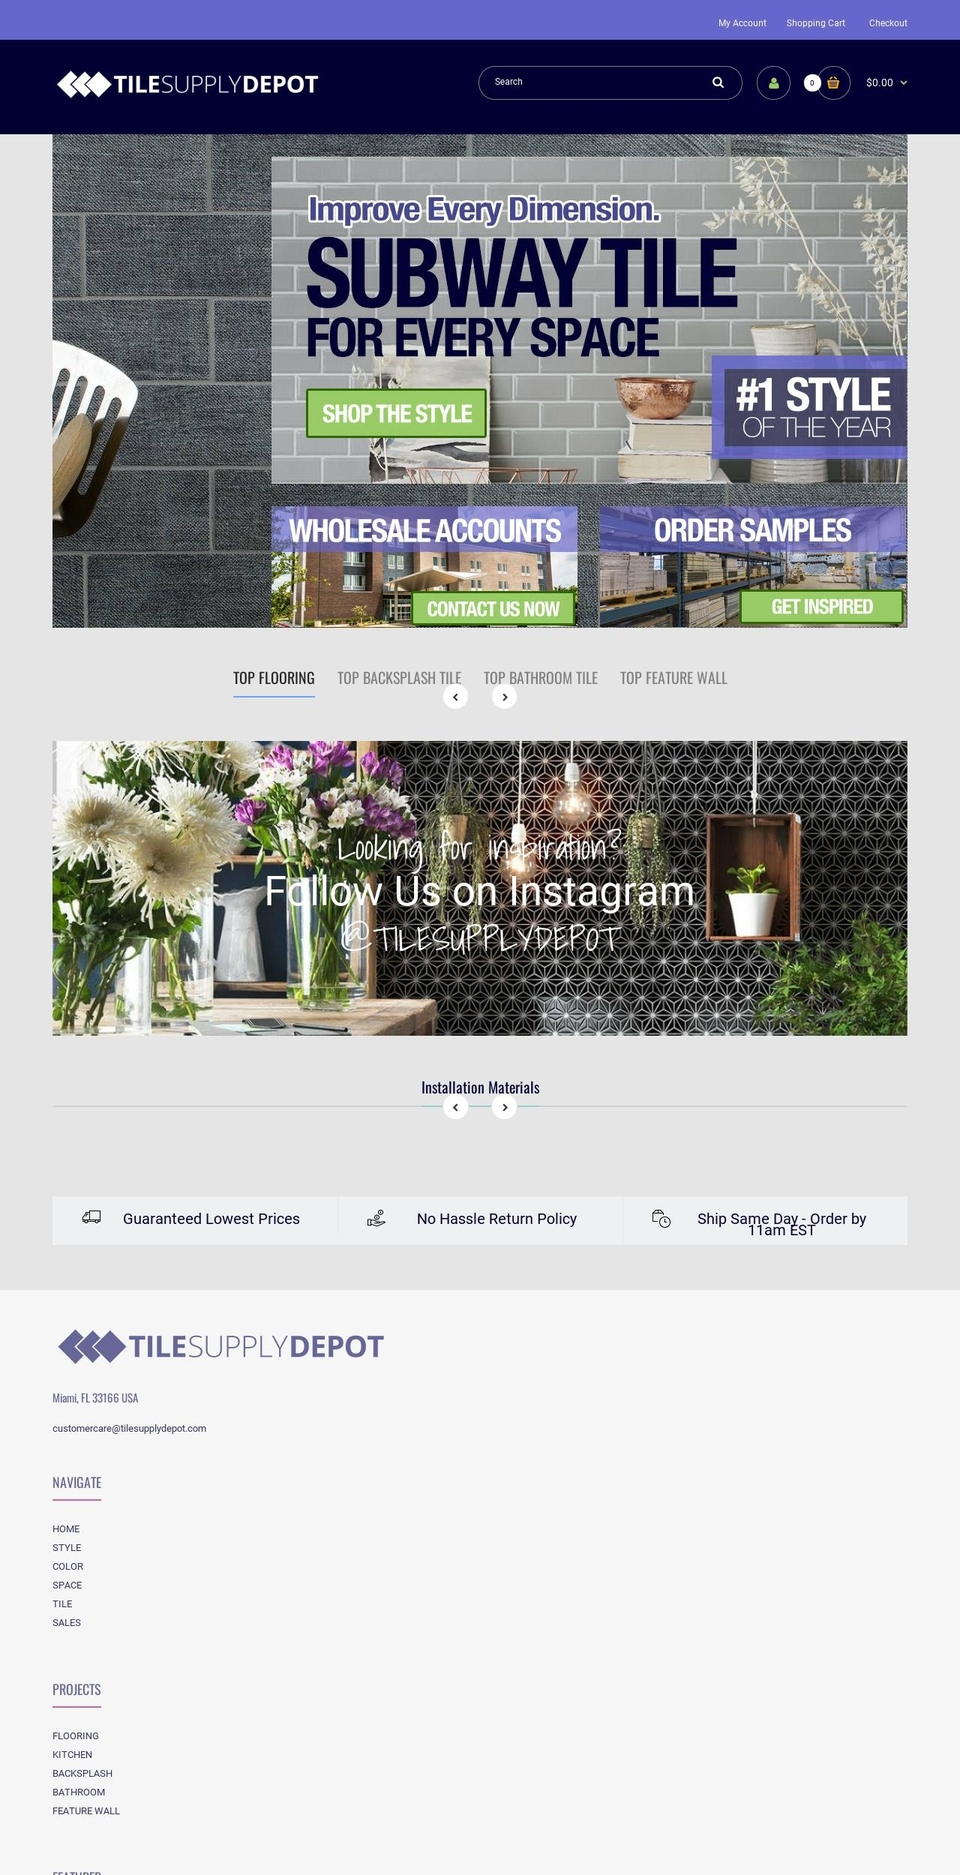 FASTOR Shopify theme site example tilesupplydepot.com